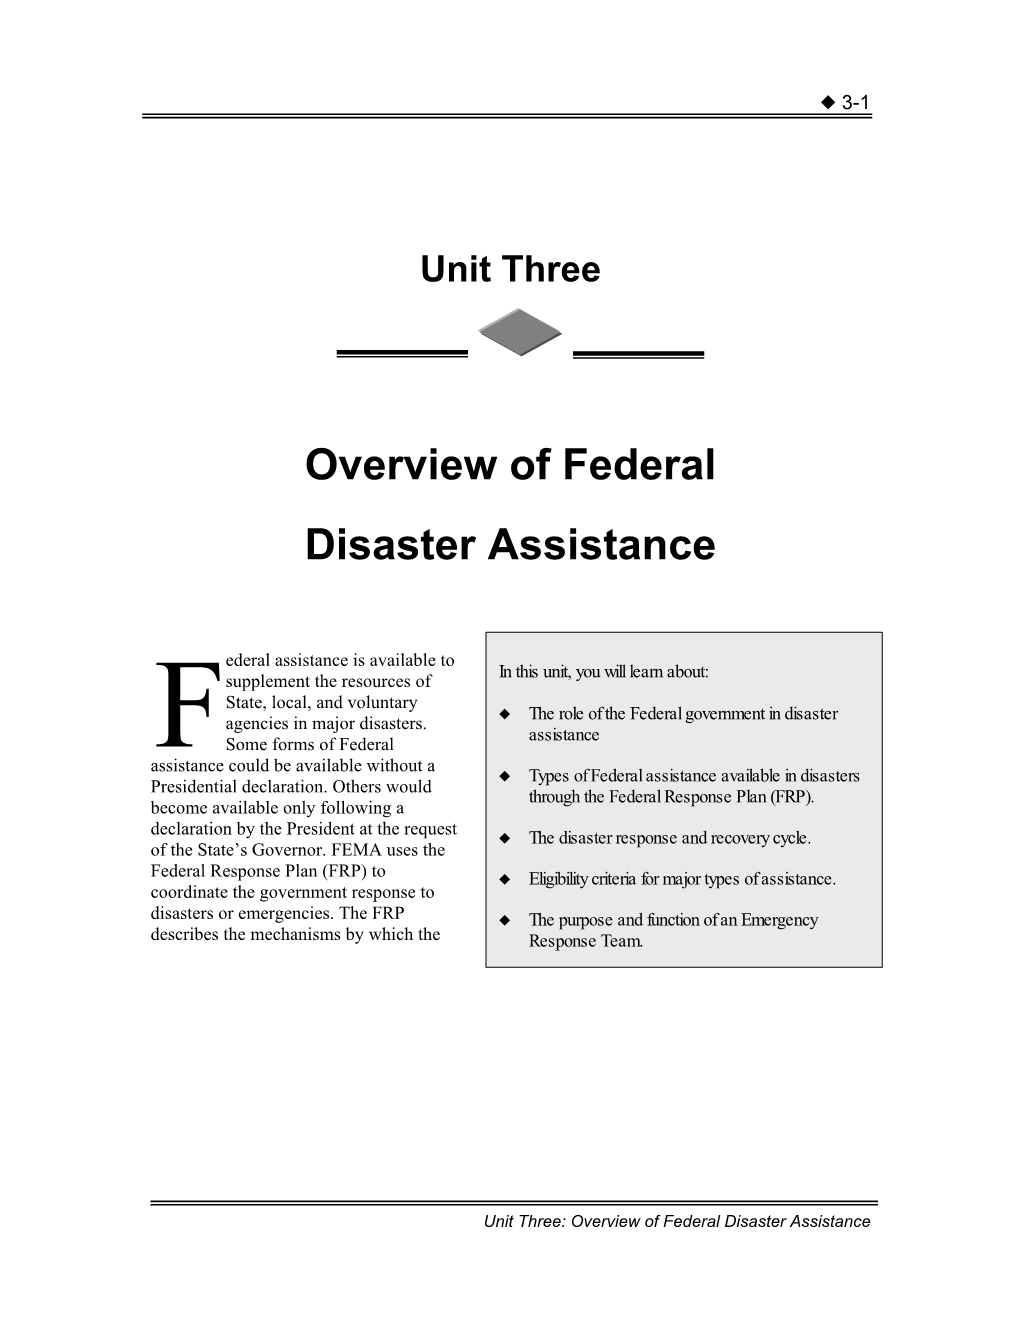 Overview of Federal Disaster Assistance